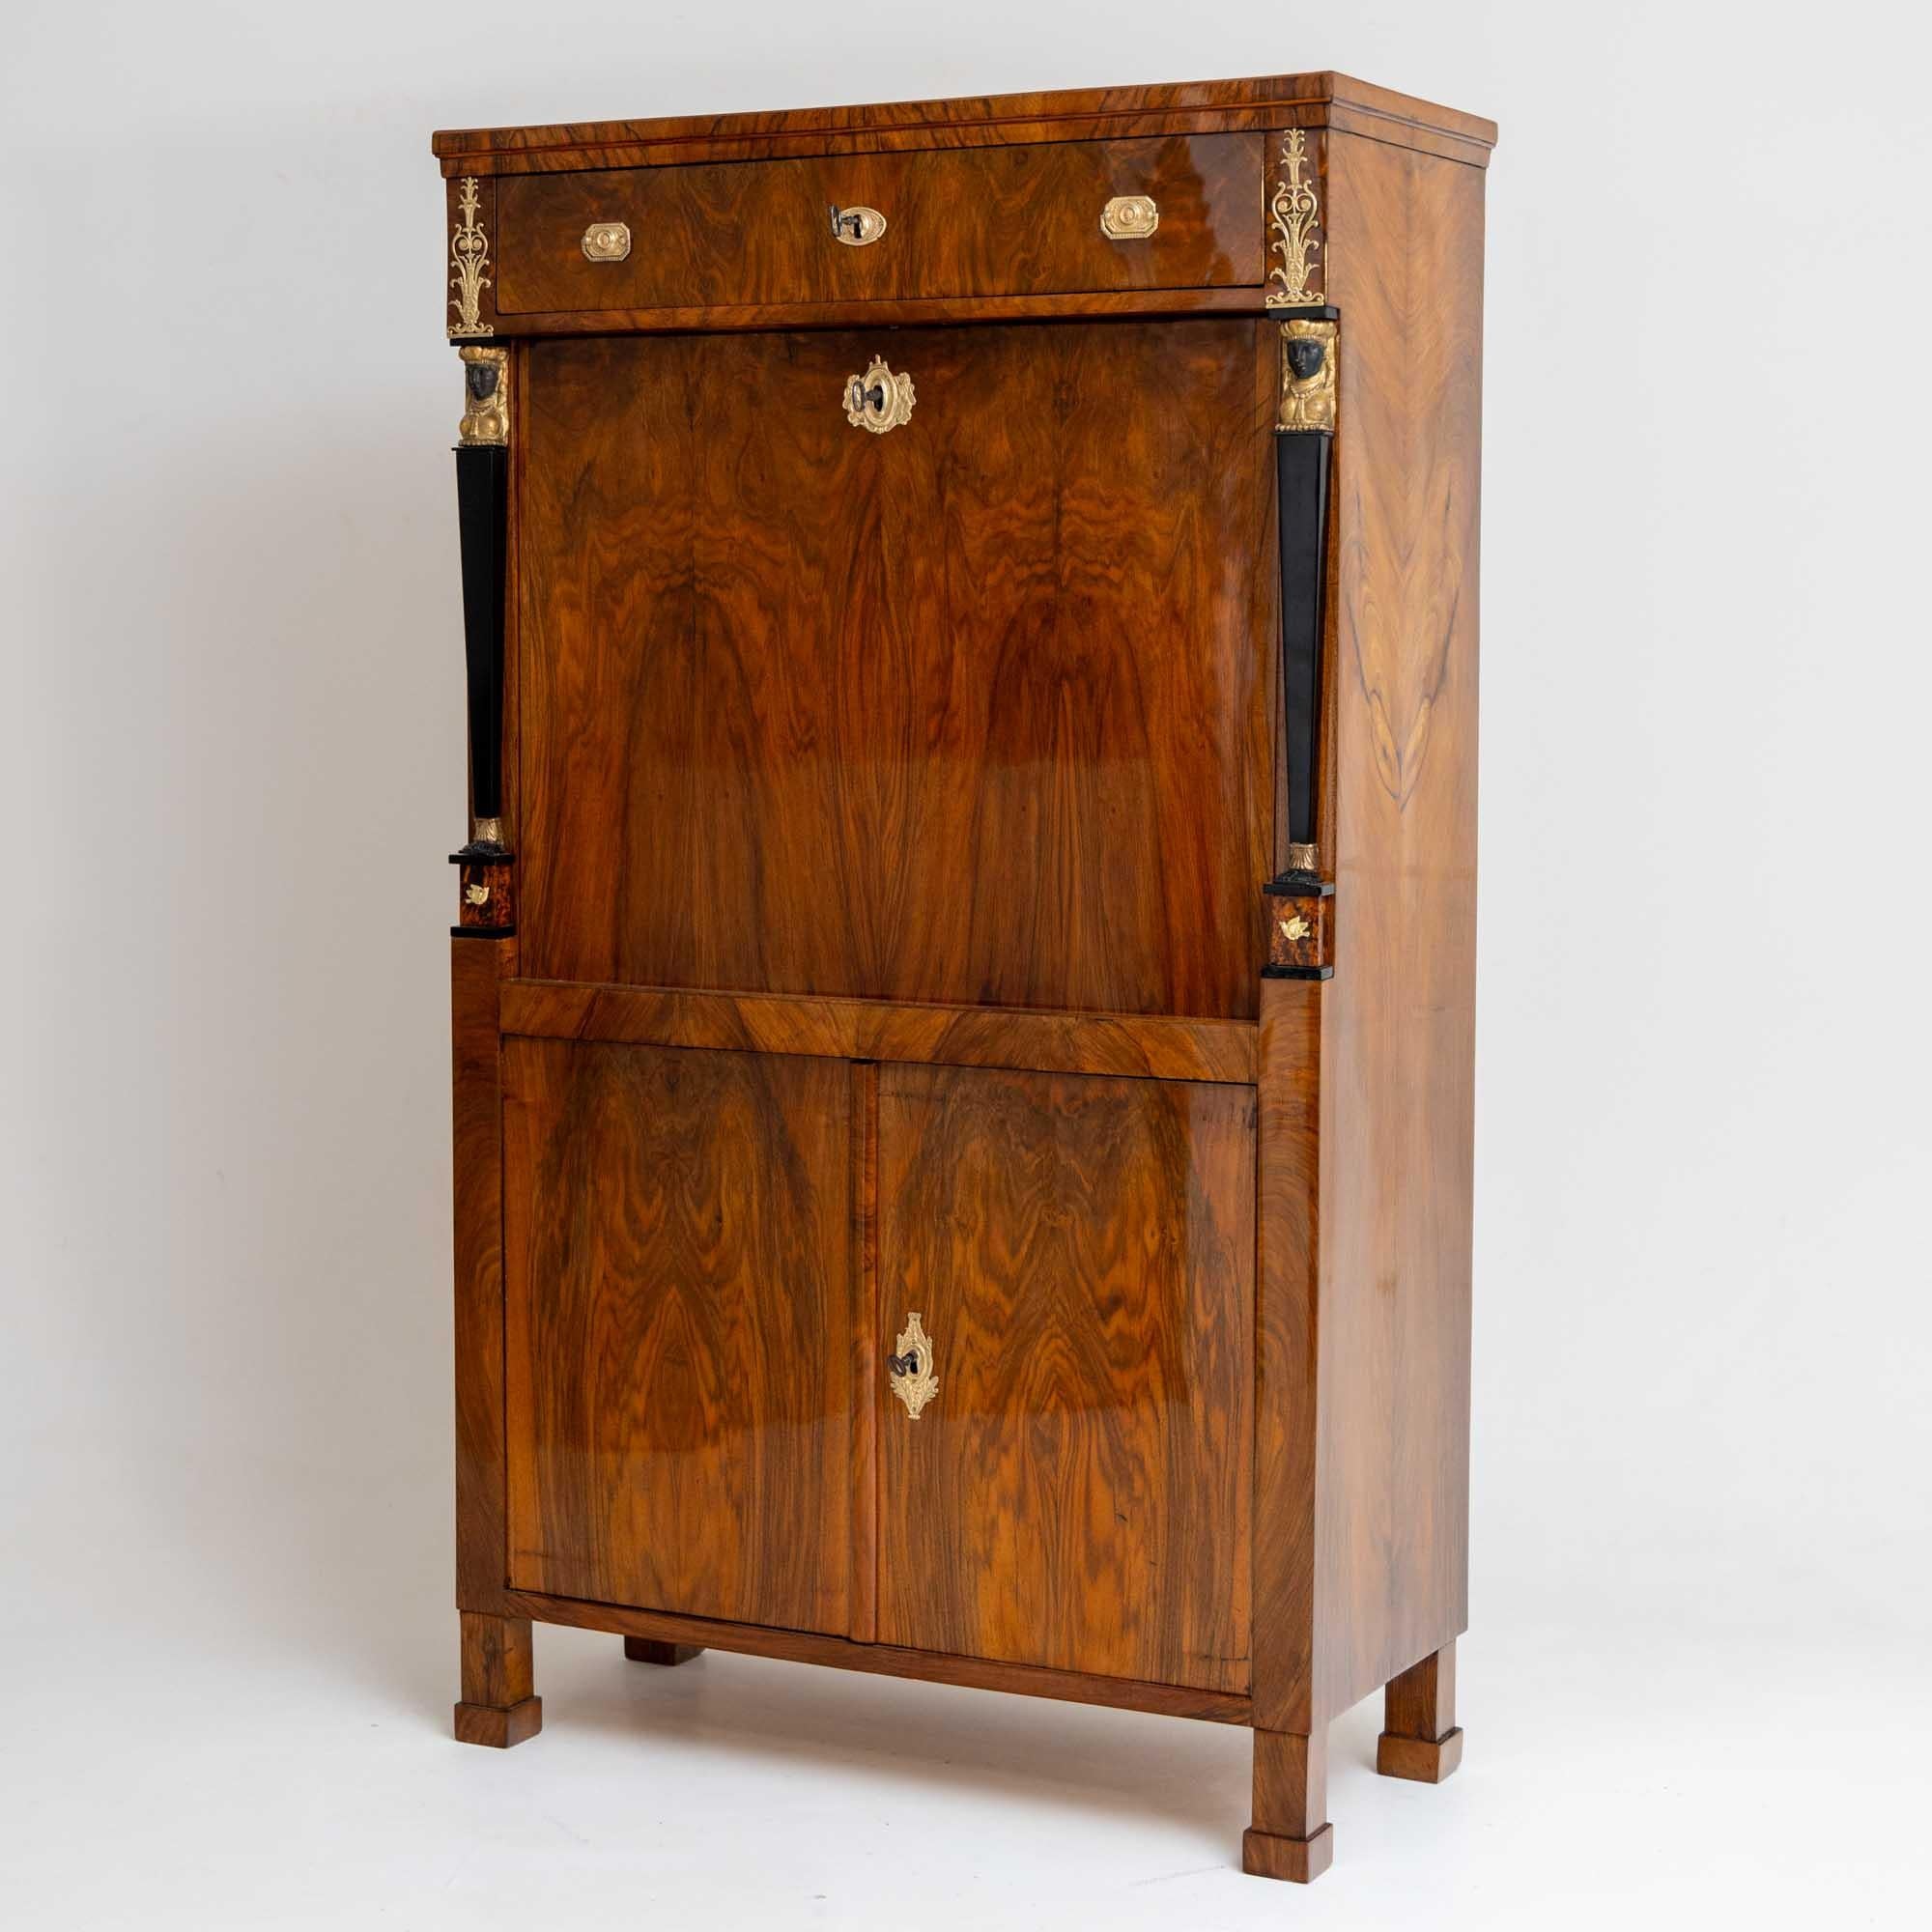 Empire secretary adorned with flanking caryatids around the flat writing flap, top drawer, and a two-door base cabinet. The caryatids are elegantly ebonized and gold-patinated, complemented by fire-gilt bronze fittings. The interior boasts several